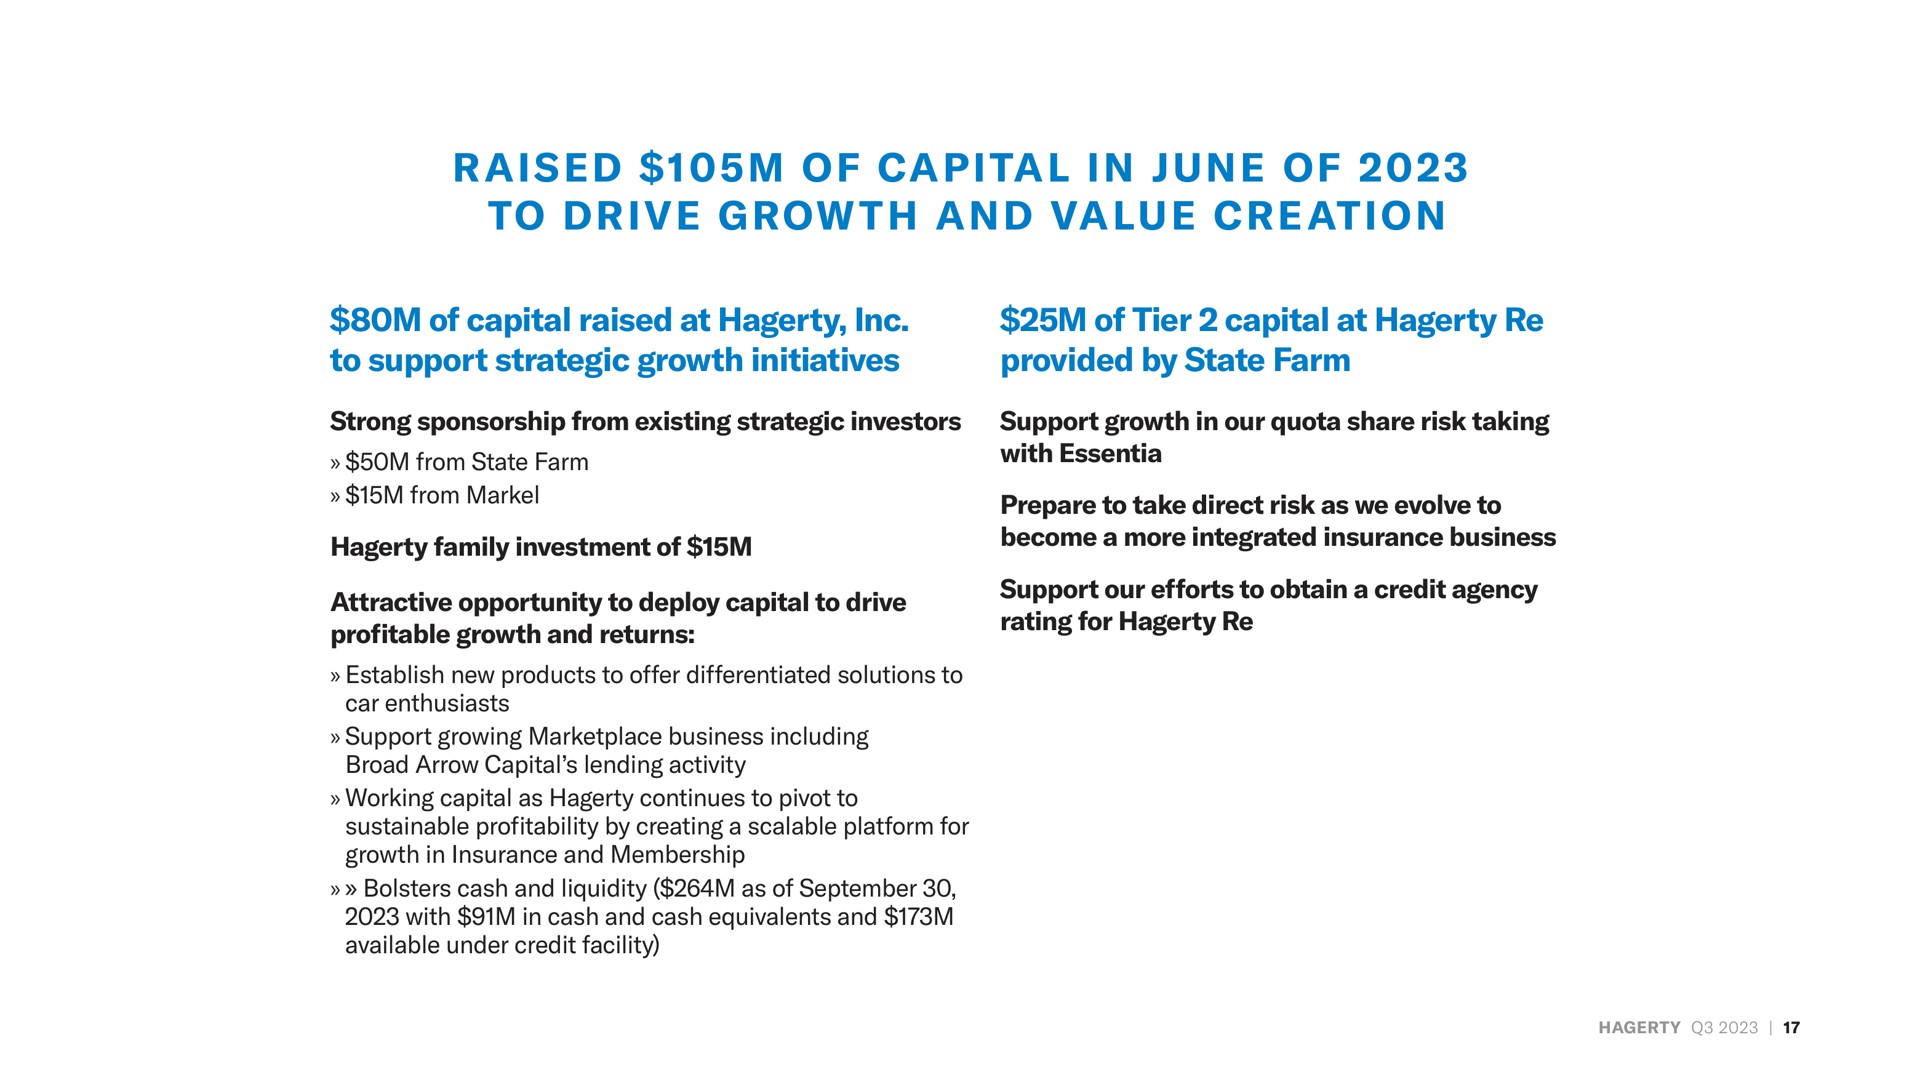 a of tal i of to rive grow an at i on of capital raised at to support strategic growth initiatives of tier capital at provided by state farm in june drive and value creation | Hagerty